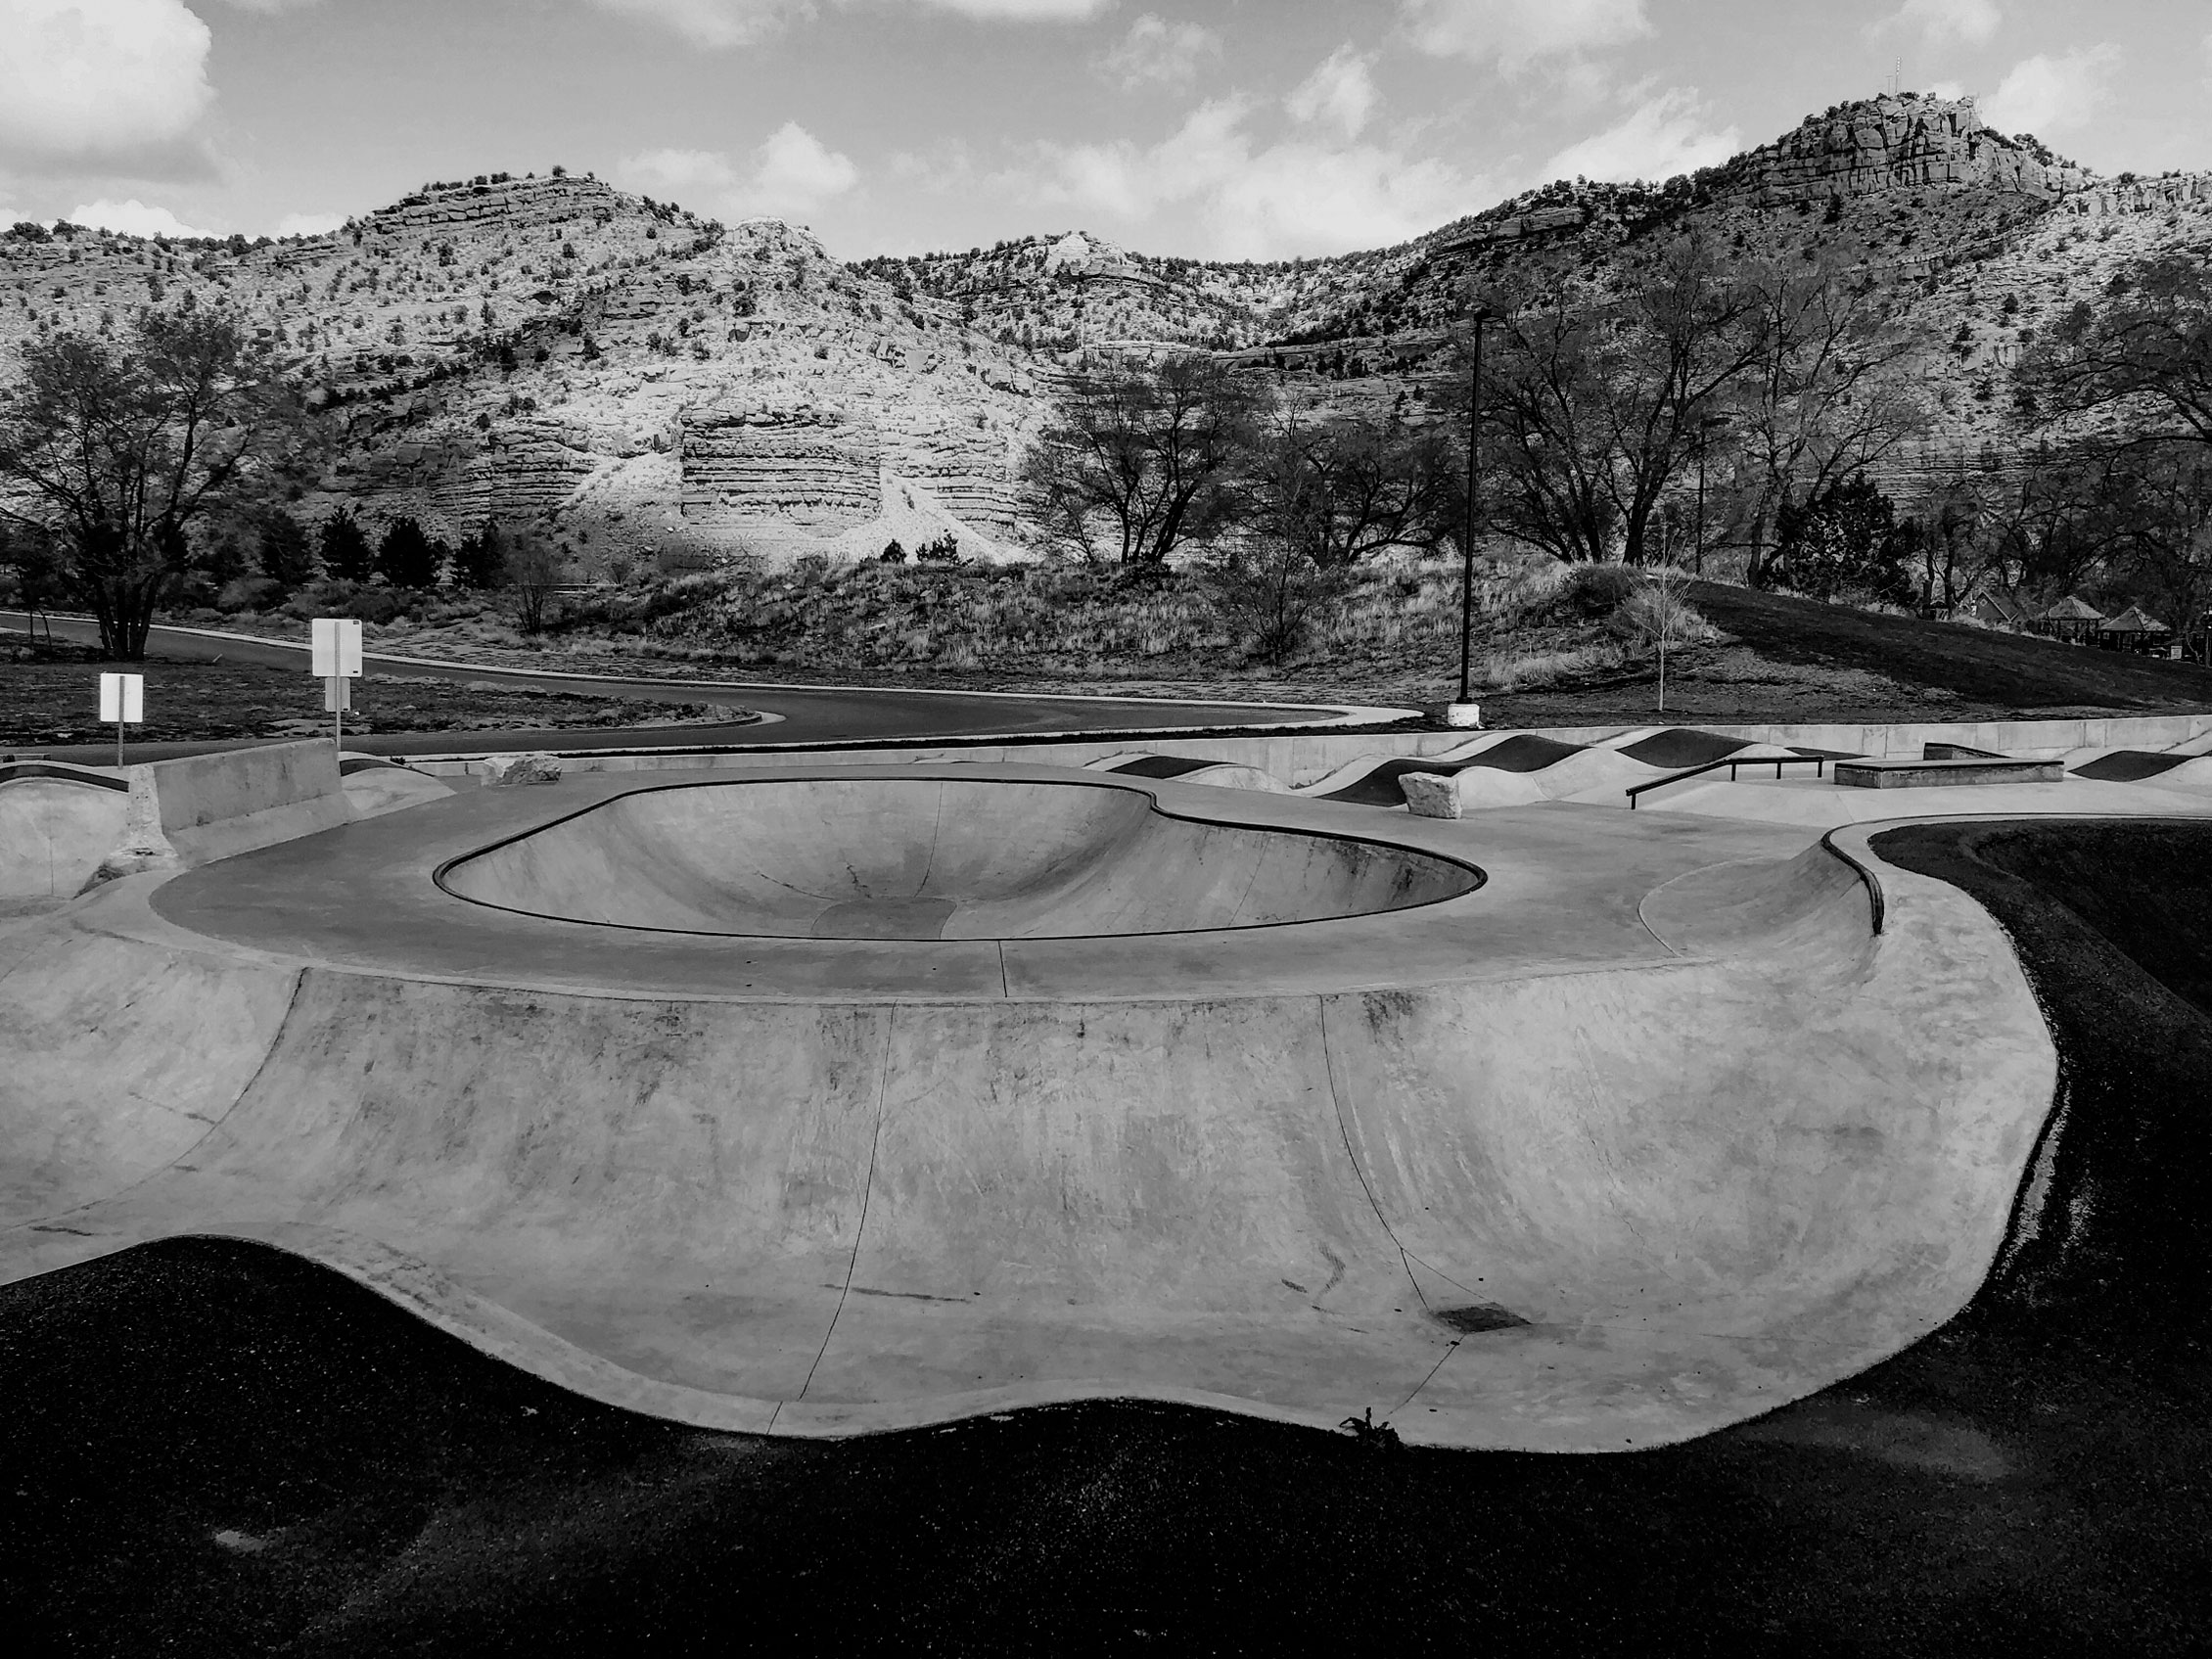 Roadtripping_MiddleOfNowhere_SkateParkProject_Park32a_Retouched